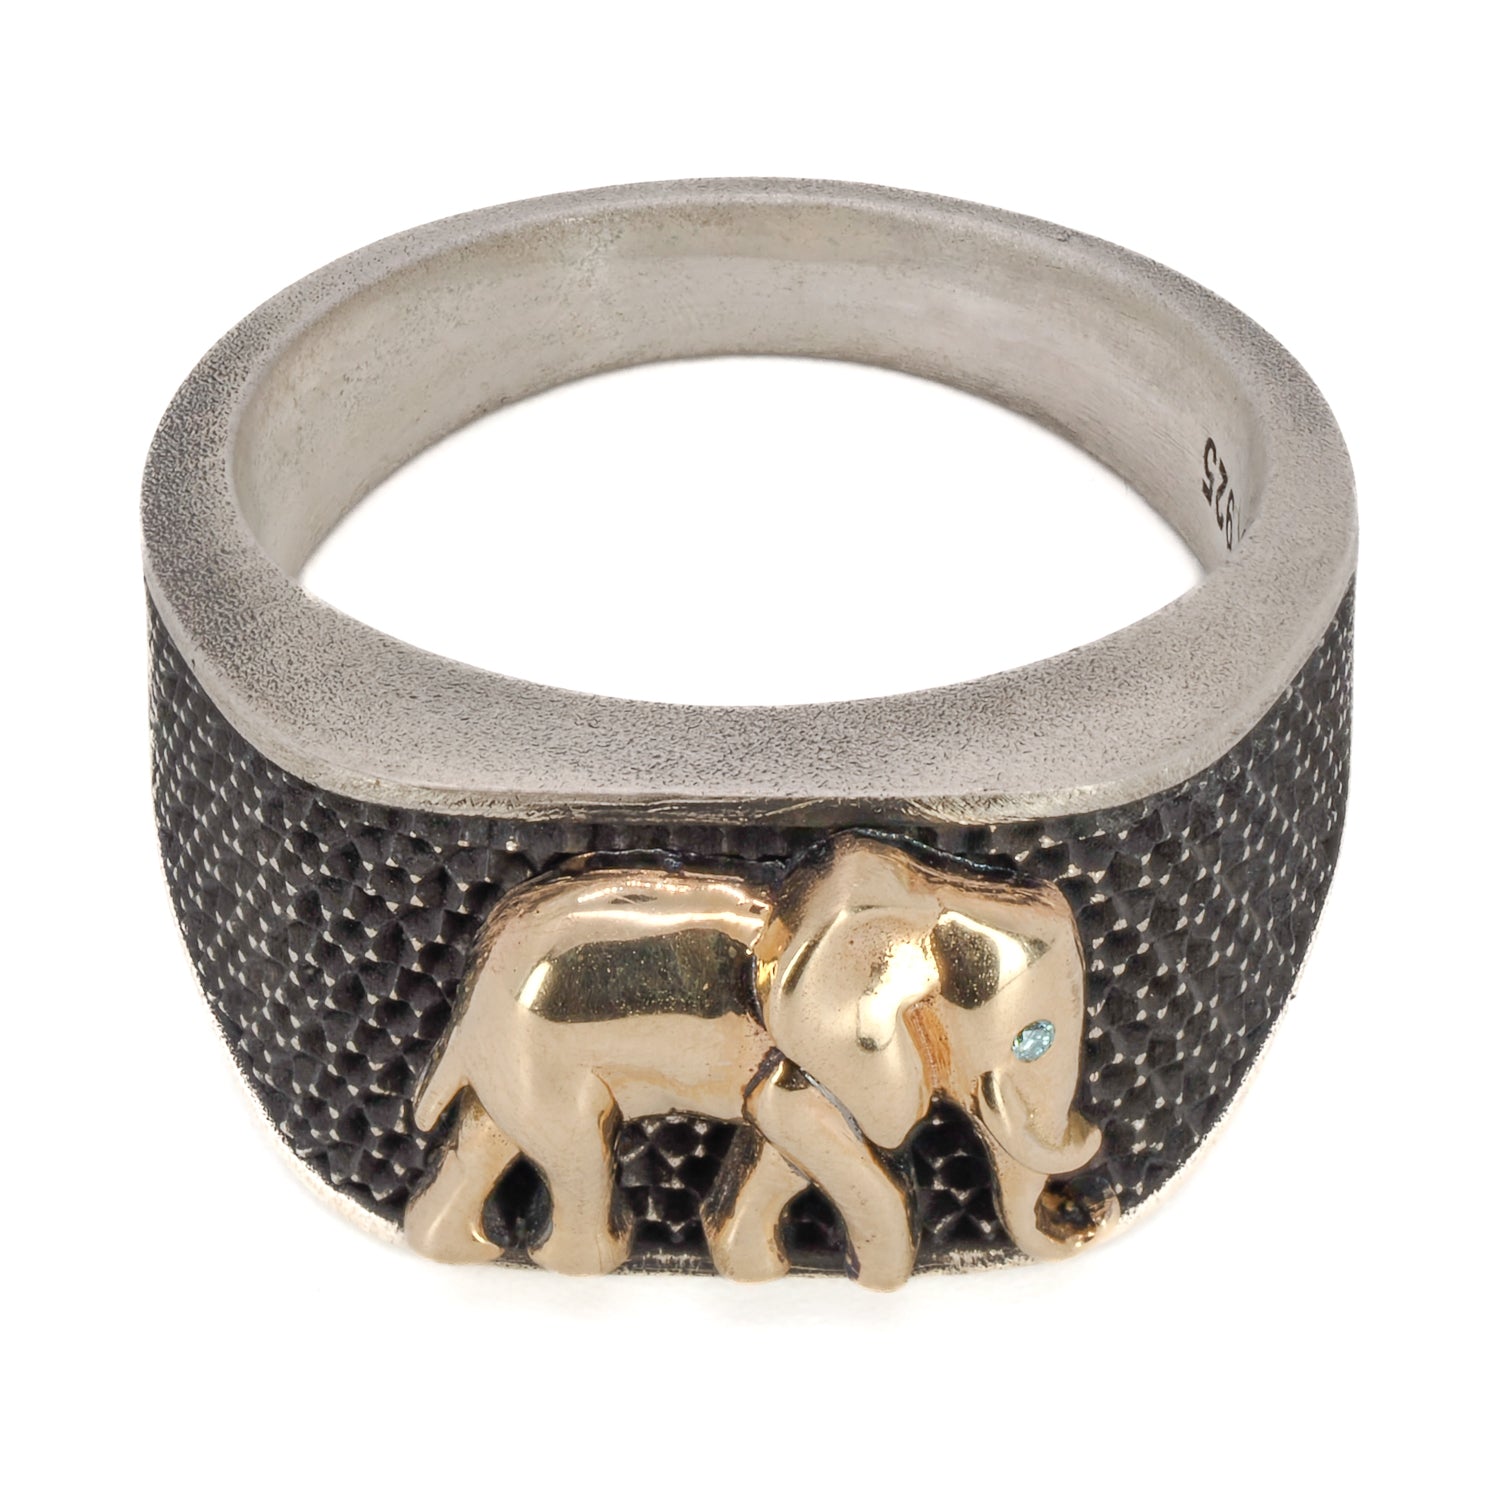 Handmade Jewelry - Stunning Elephant Ring with Silver and Gold.